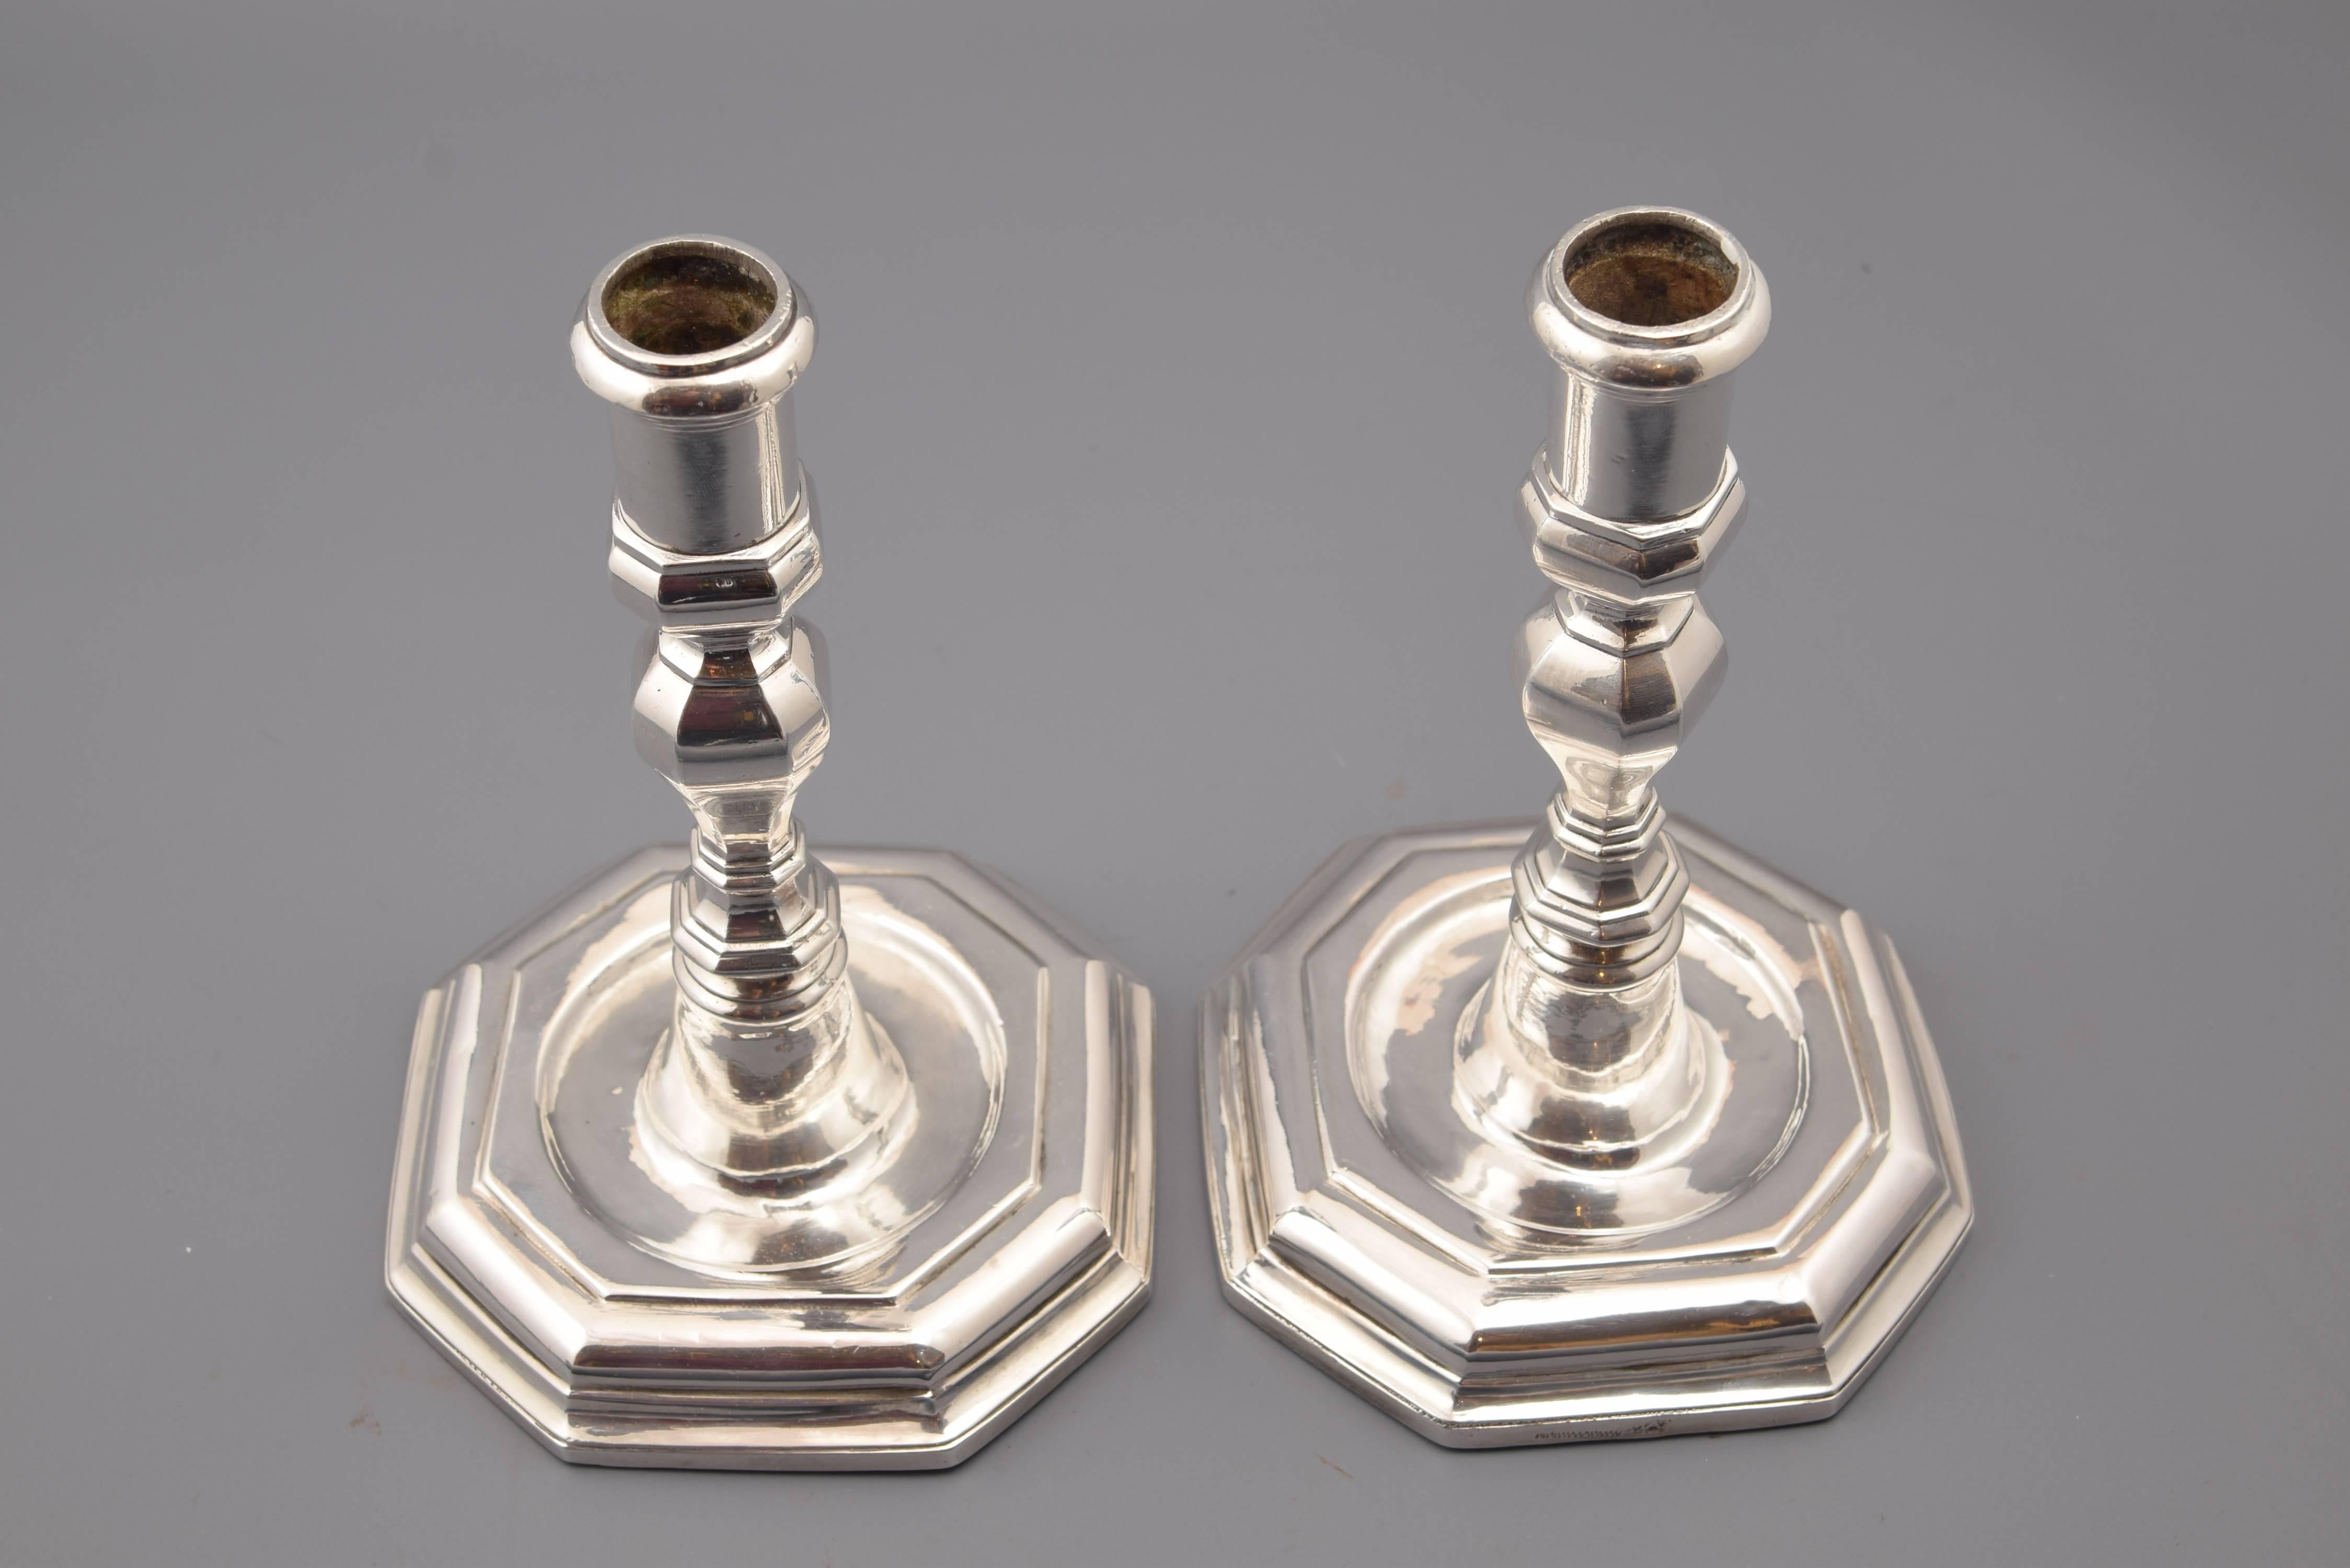 Pair of Silver Candleholders, Mallorca, Spain, 18th Century 1